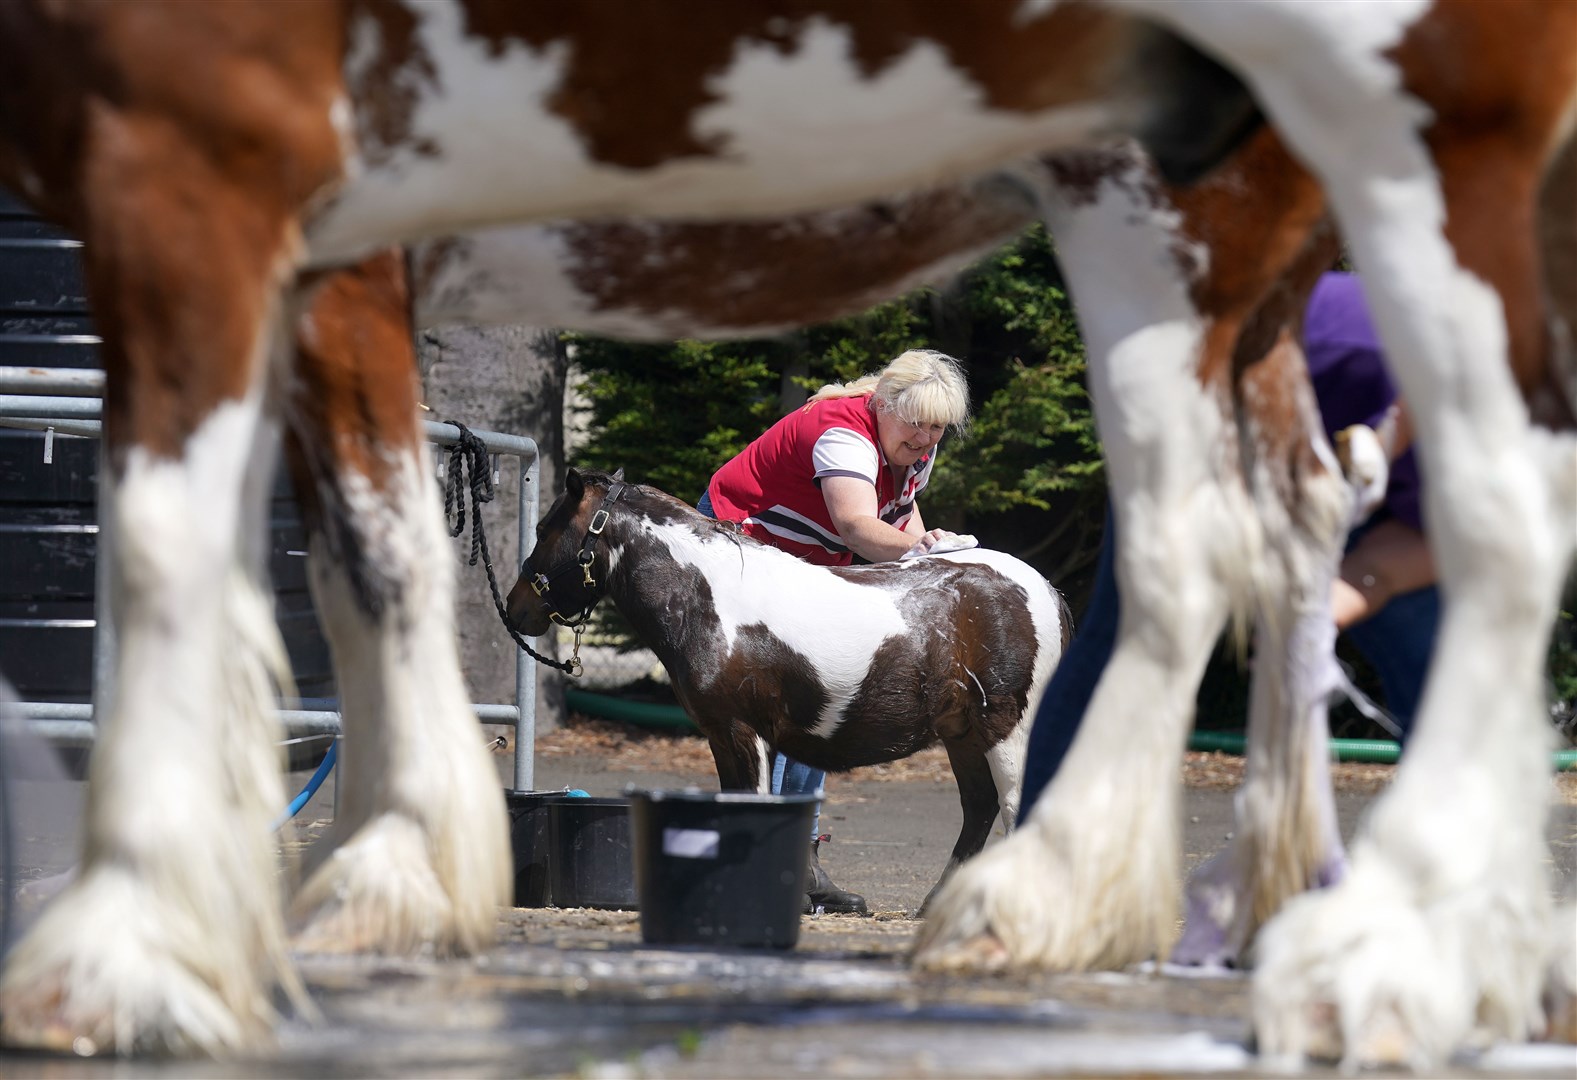 A miniature Shetland pony peeked out from under a giant Clydesdale horse at the Royal Highland Show in Ingliston, Edinburgh, in June (Andrew Milligan/PA)